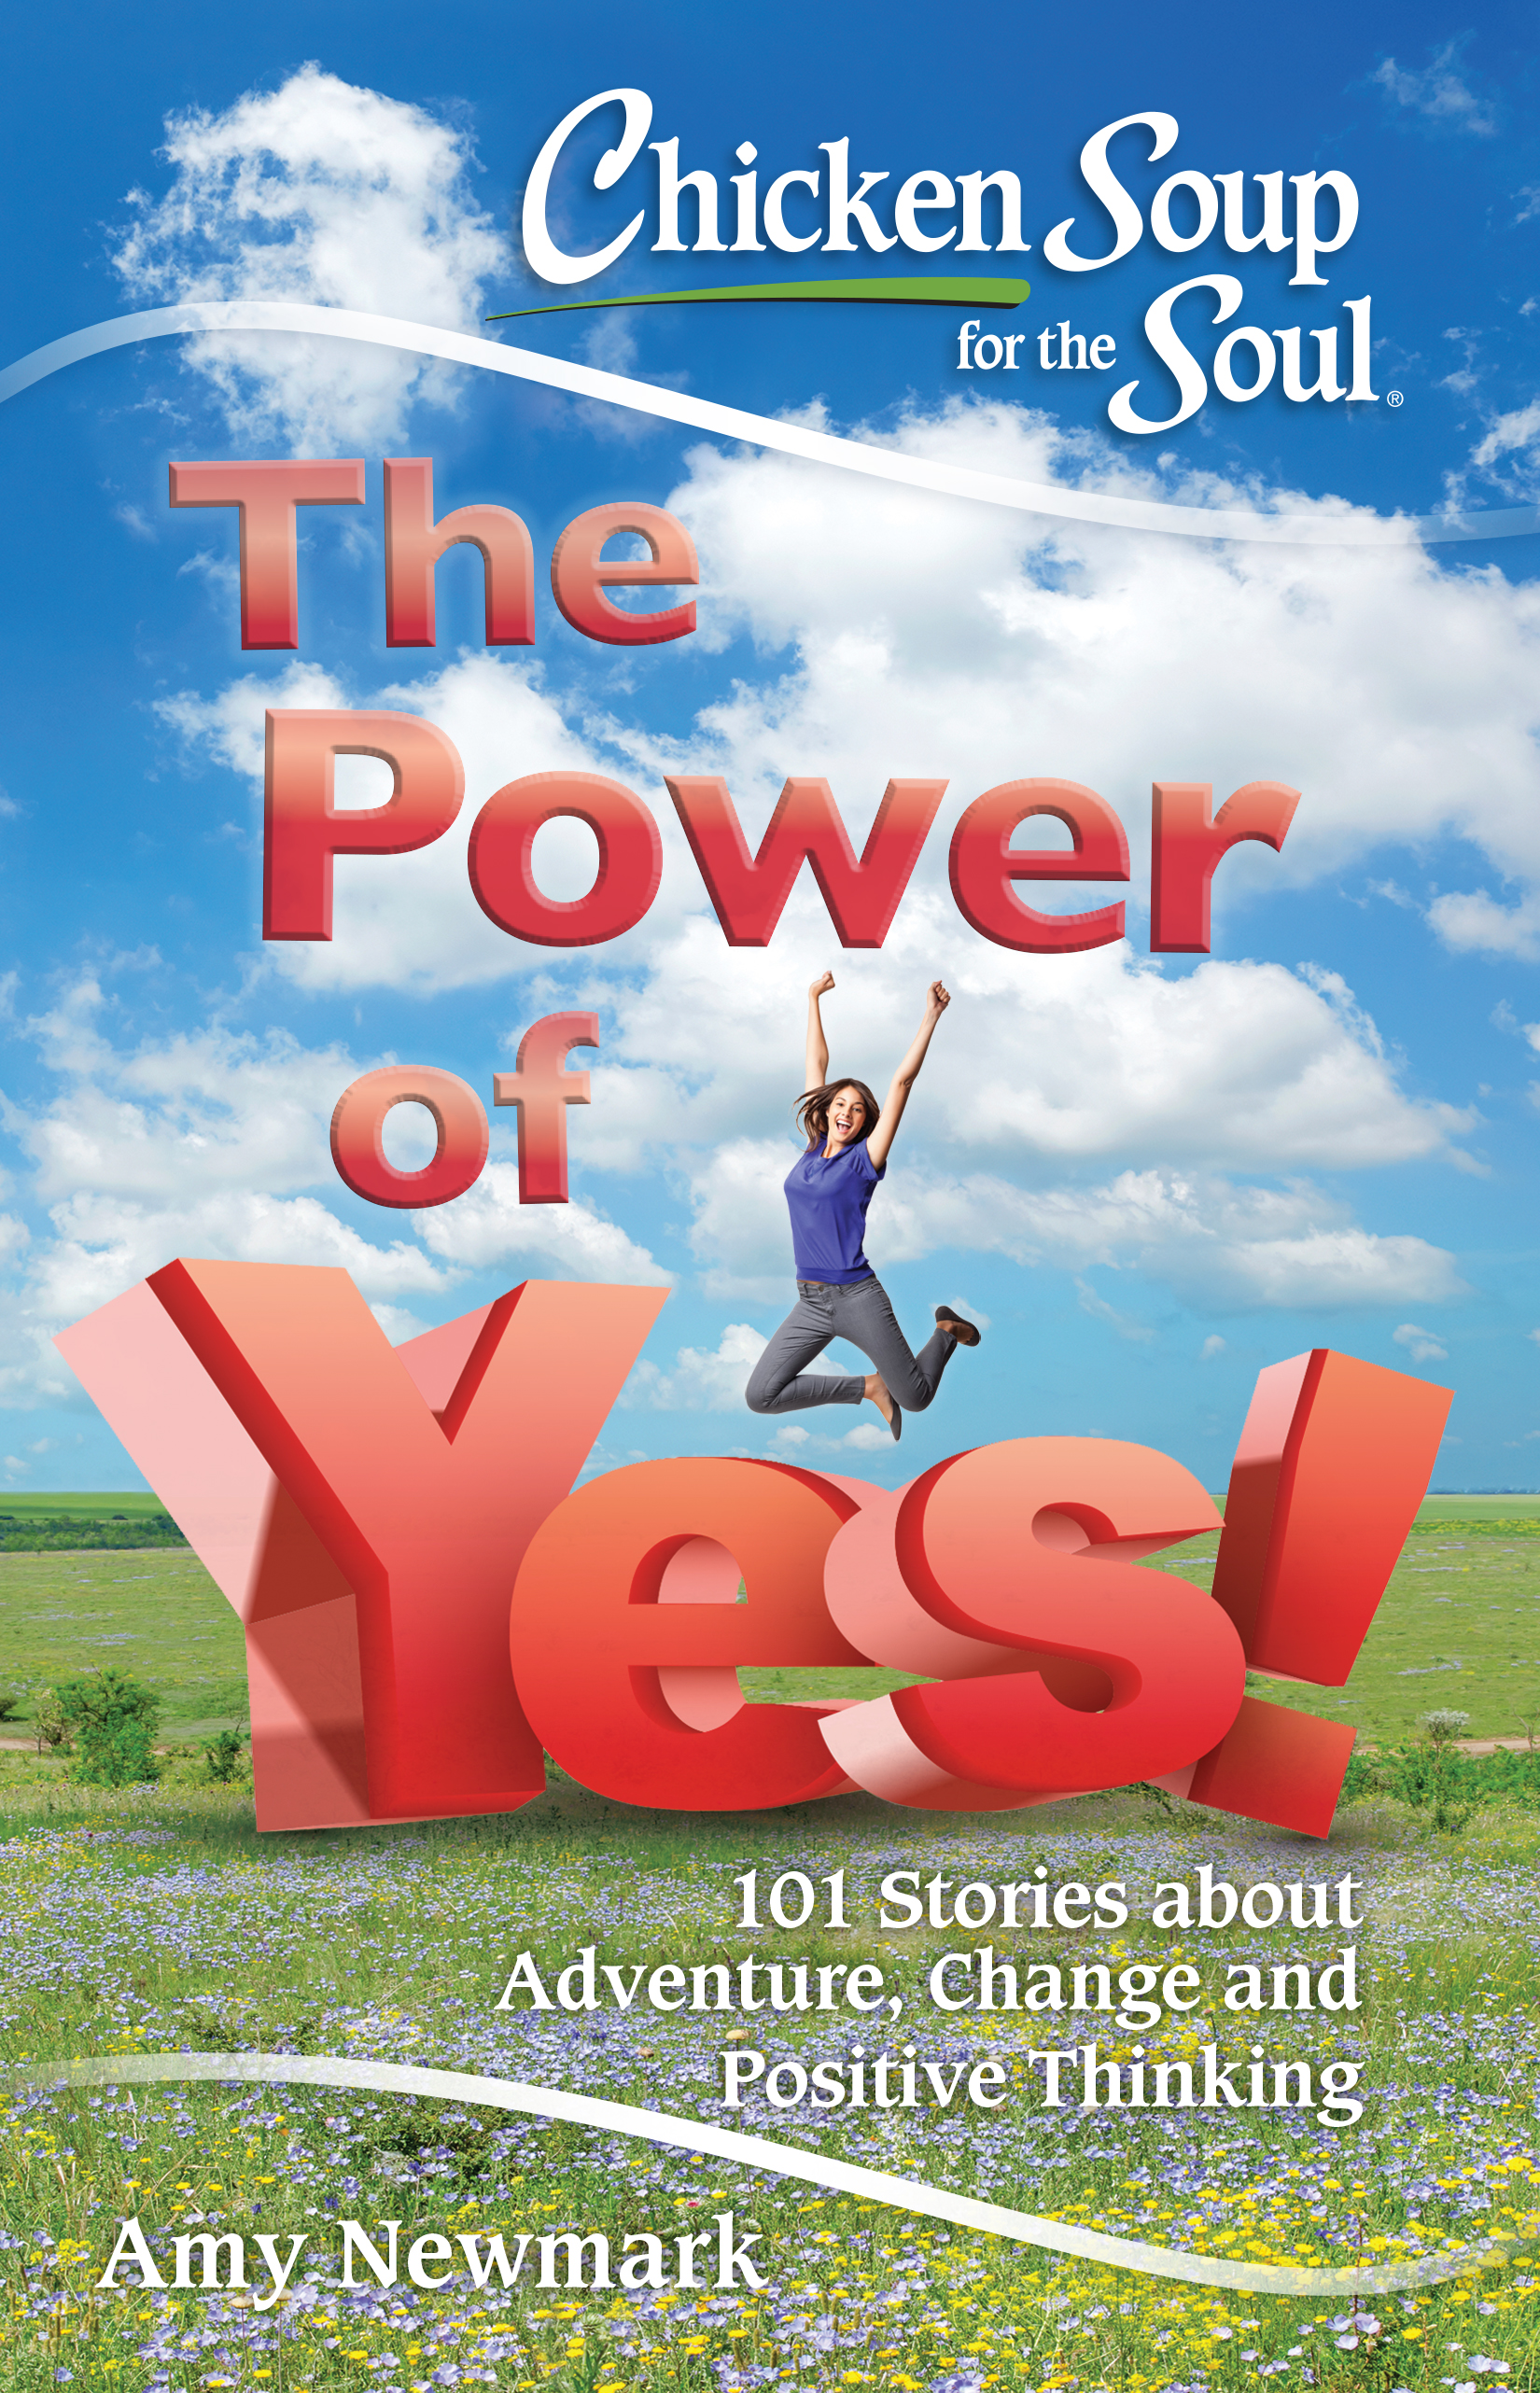 Two Brooklyn writers teach readers the power of ‘yes’